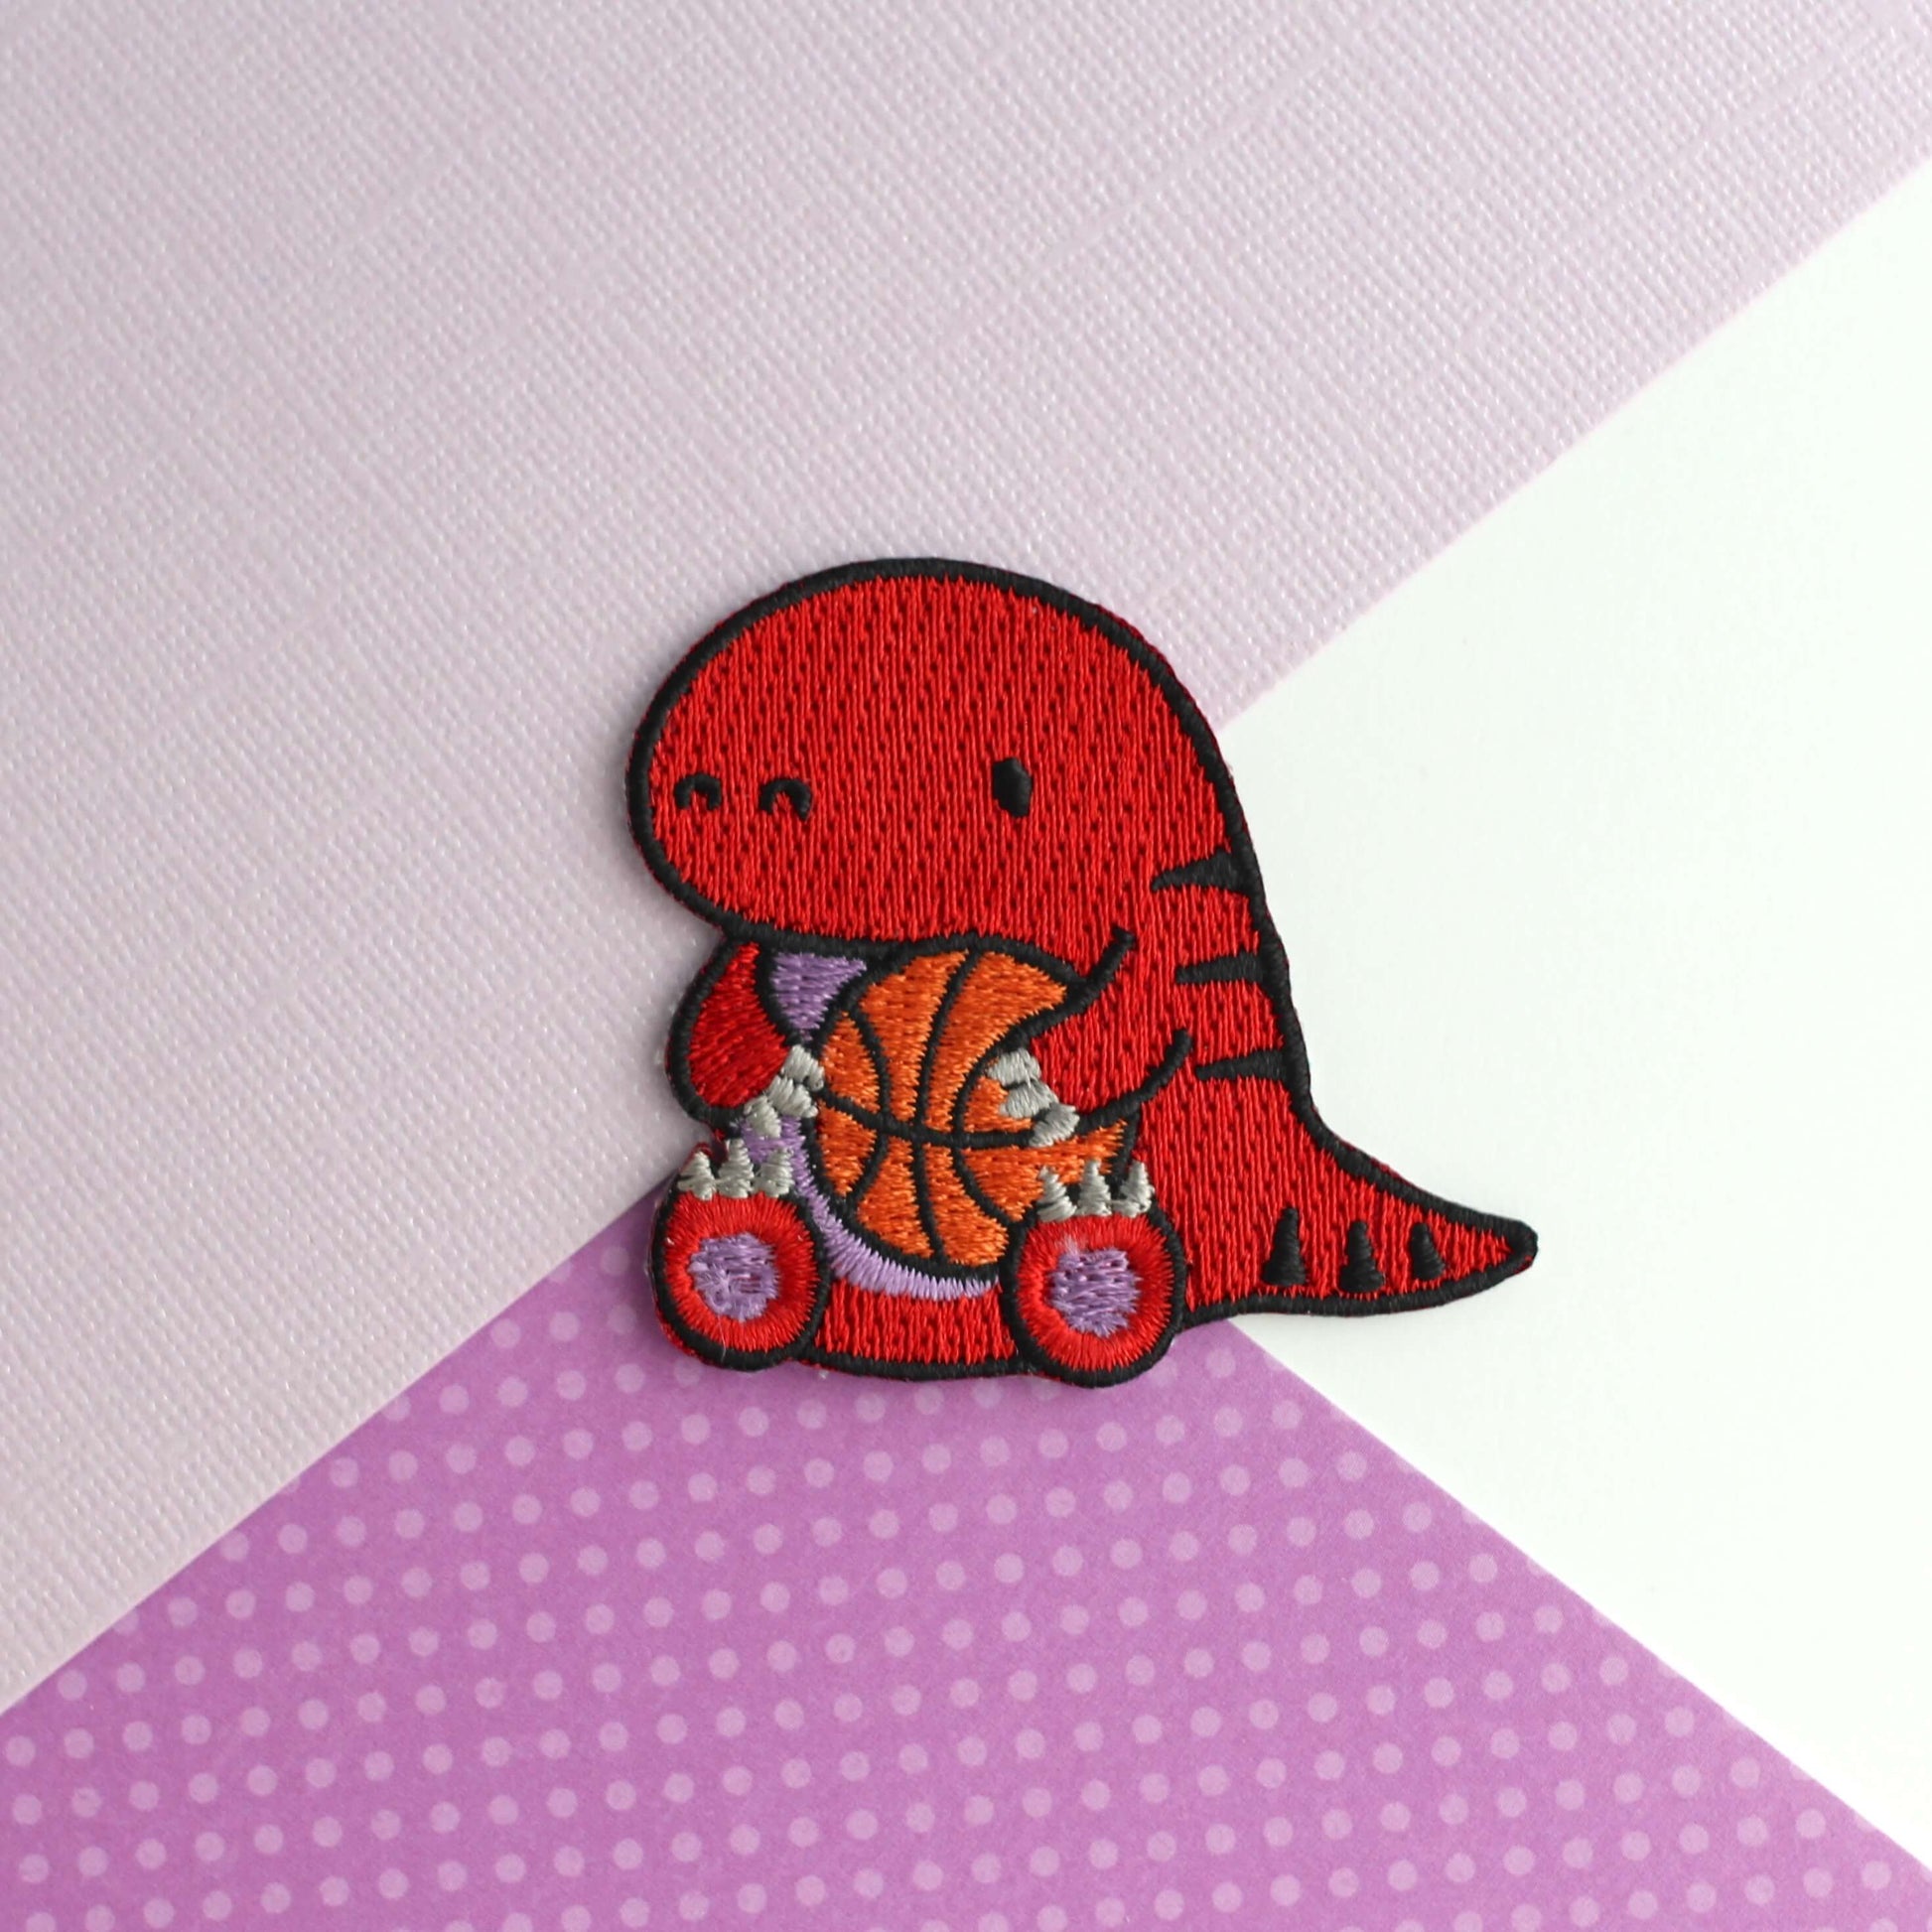 Basketball Raptor Embroidered Iron On Patch